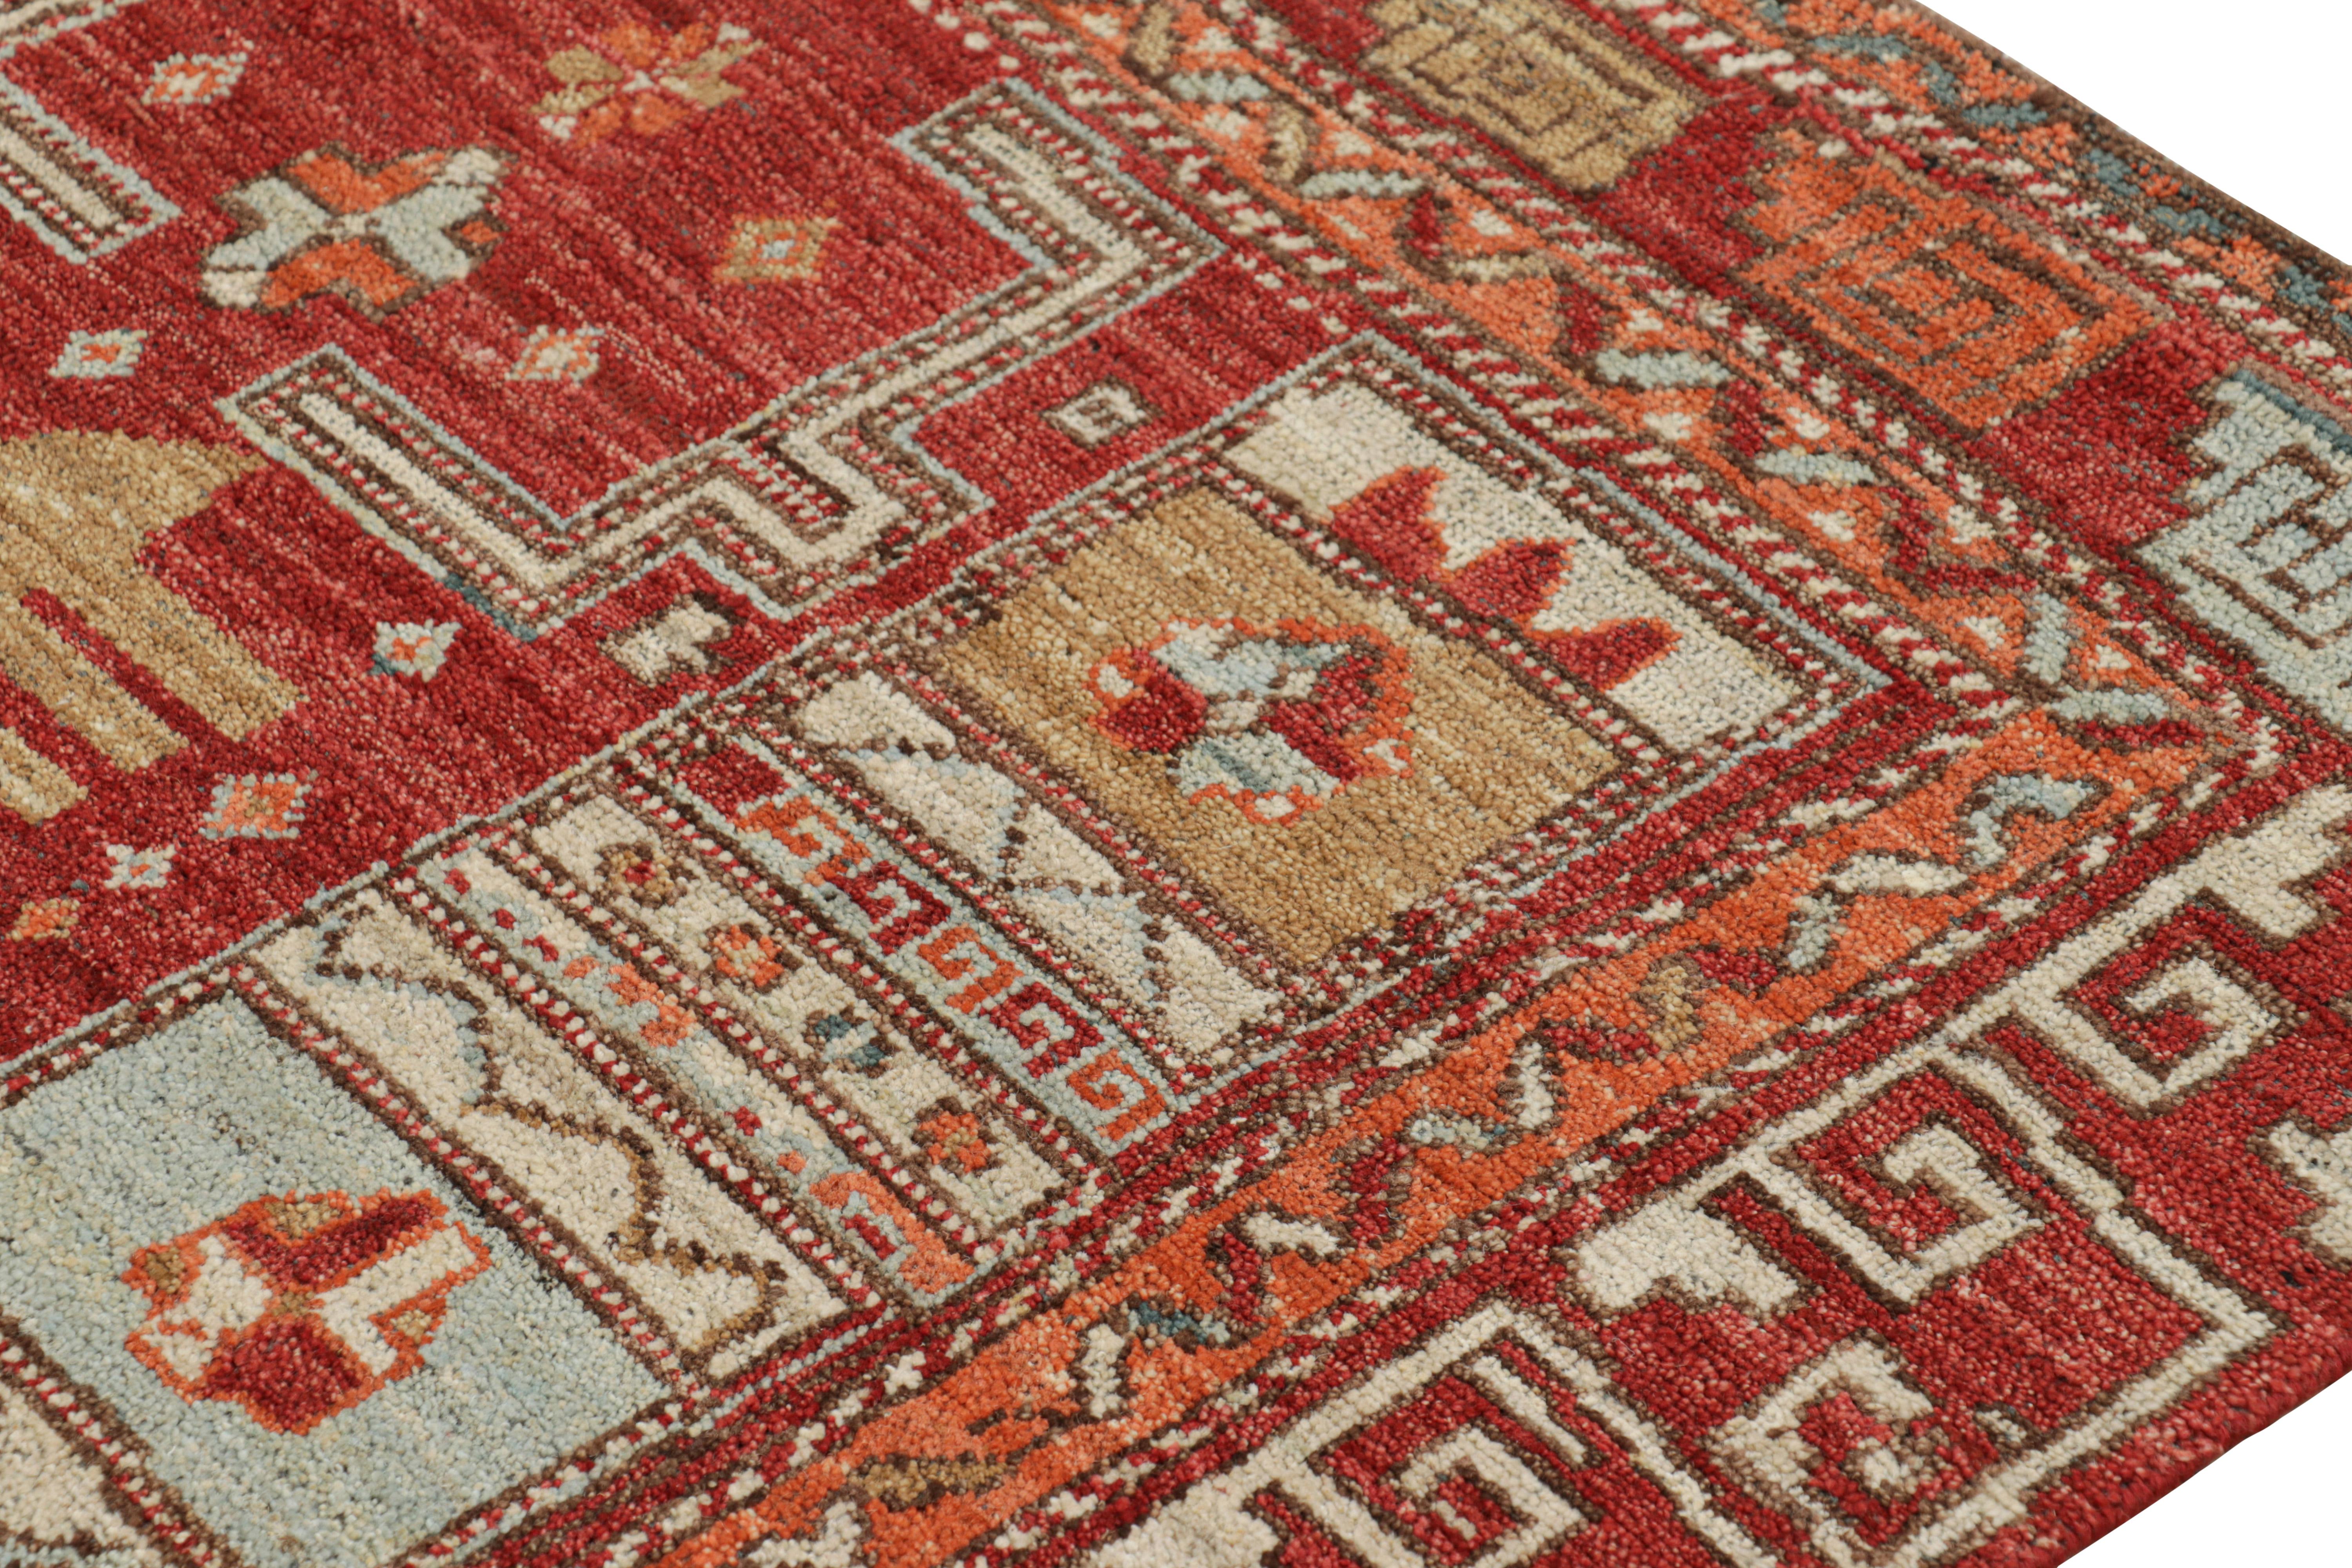 Contemporary Rug & Kilim’s Tribal Rug in Rich Red, with Colorful Geometric Patterns For Sale